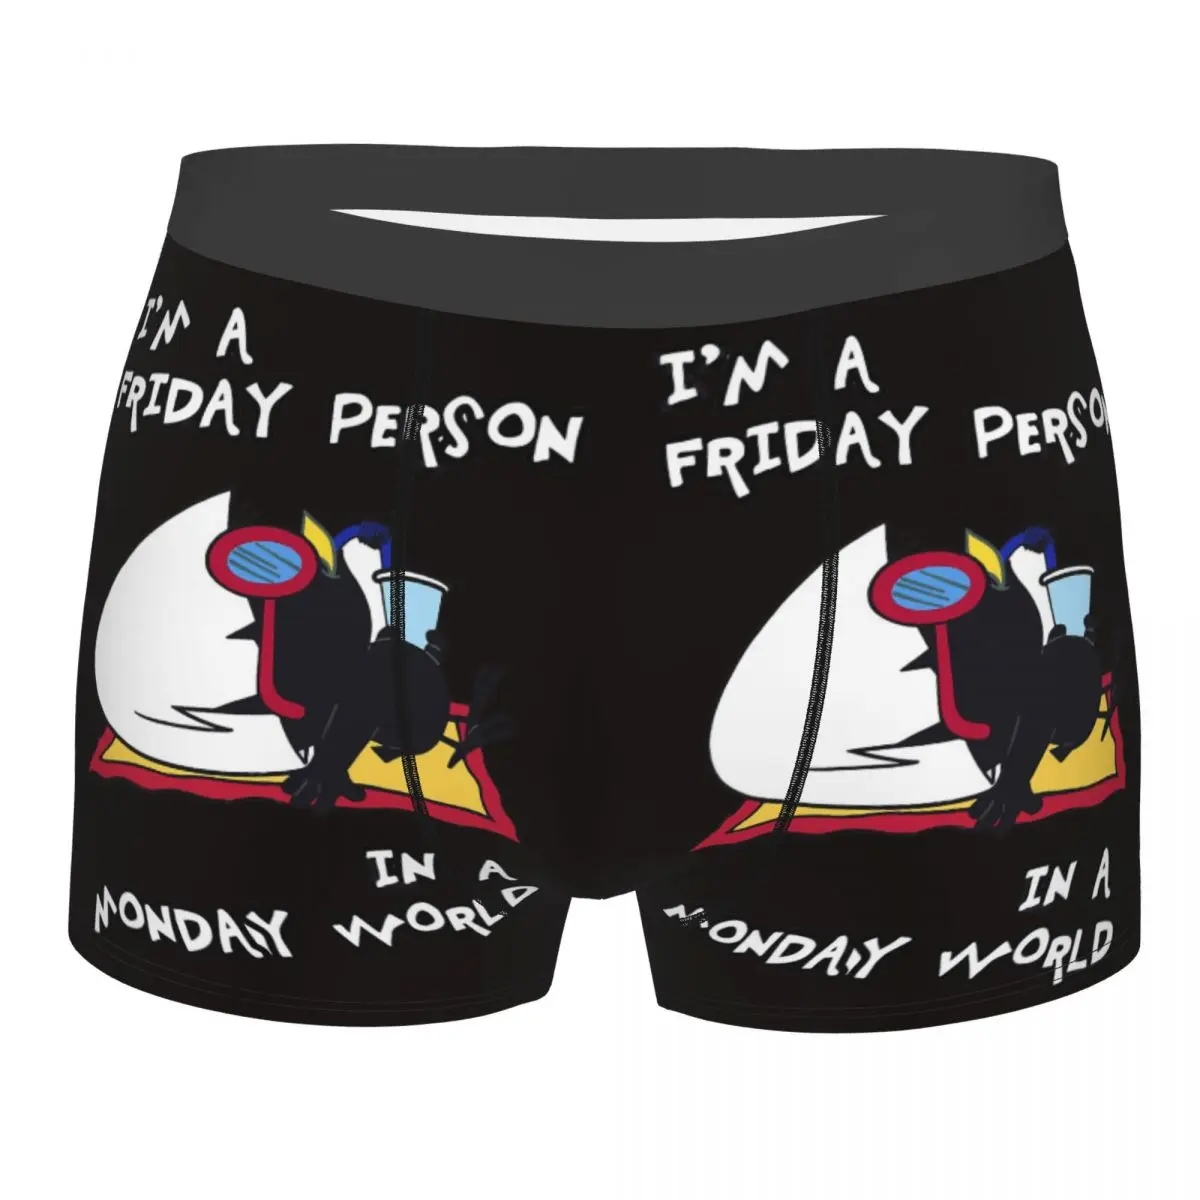 I'm A Friday Person In A Monday World Men Boxer Briefs Calimero Highly Breathable Underpants High Quality Print Shorts Gift Idea